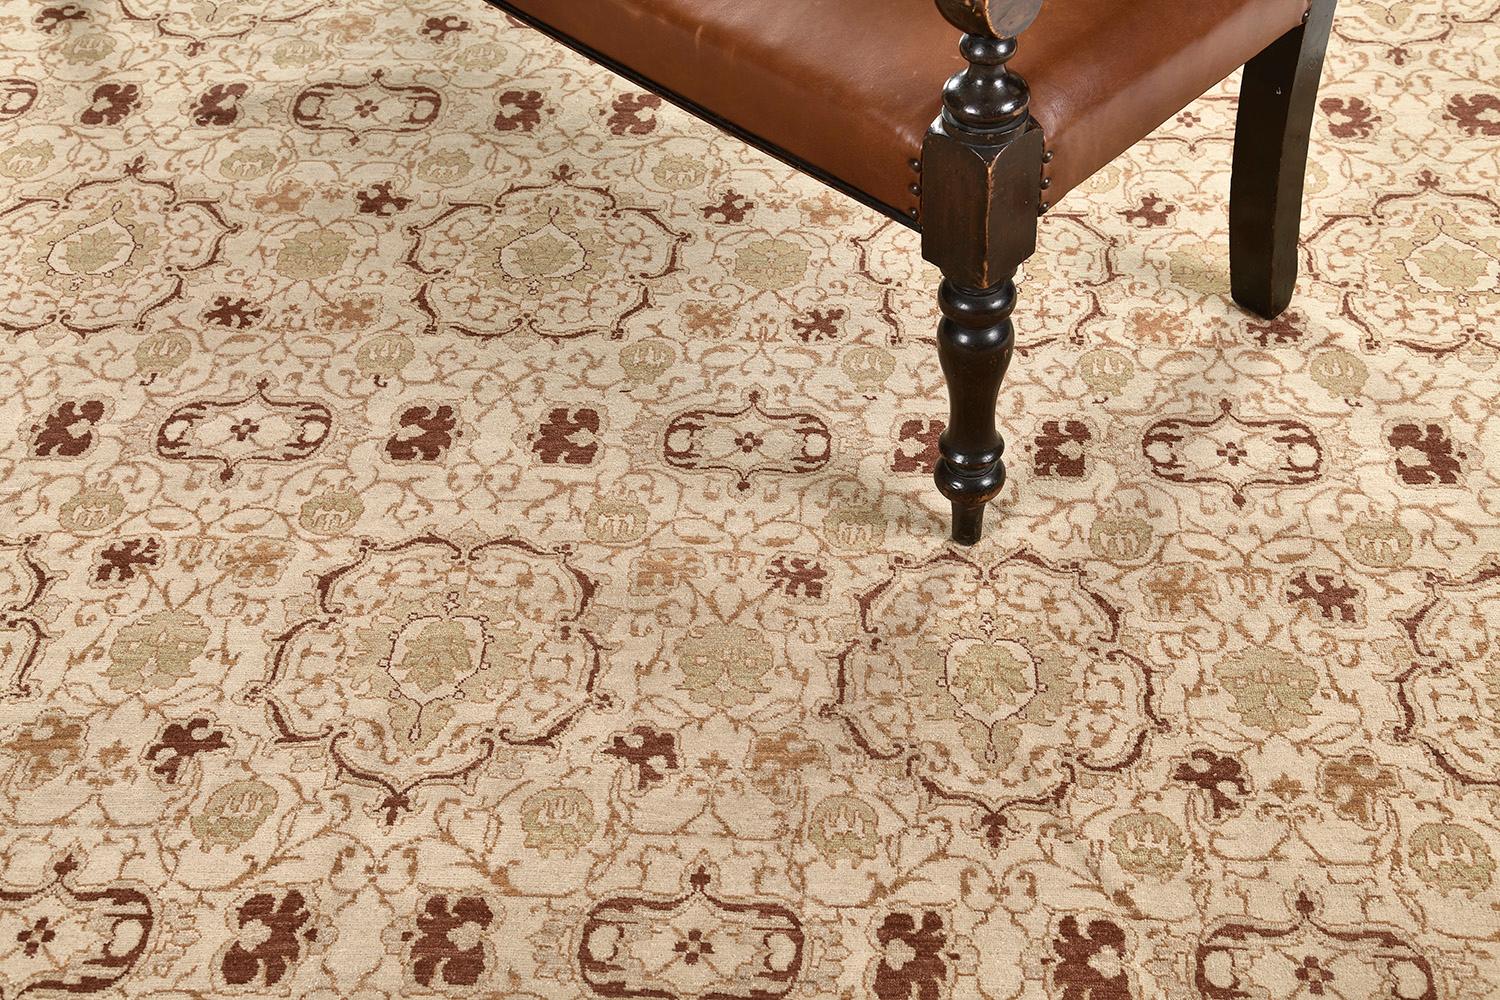 Fable has immensely incorporated a full of beautiful blooming scrolls and traditional Persian designs in a red lining that keeps the pattern very distinctive. These brilliant ornaments are designed which makes the rug unique. This rug is best